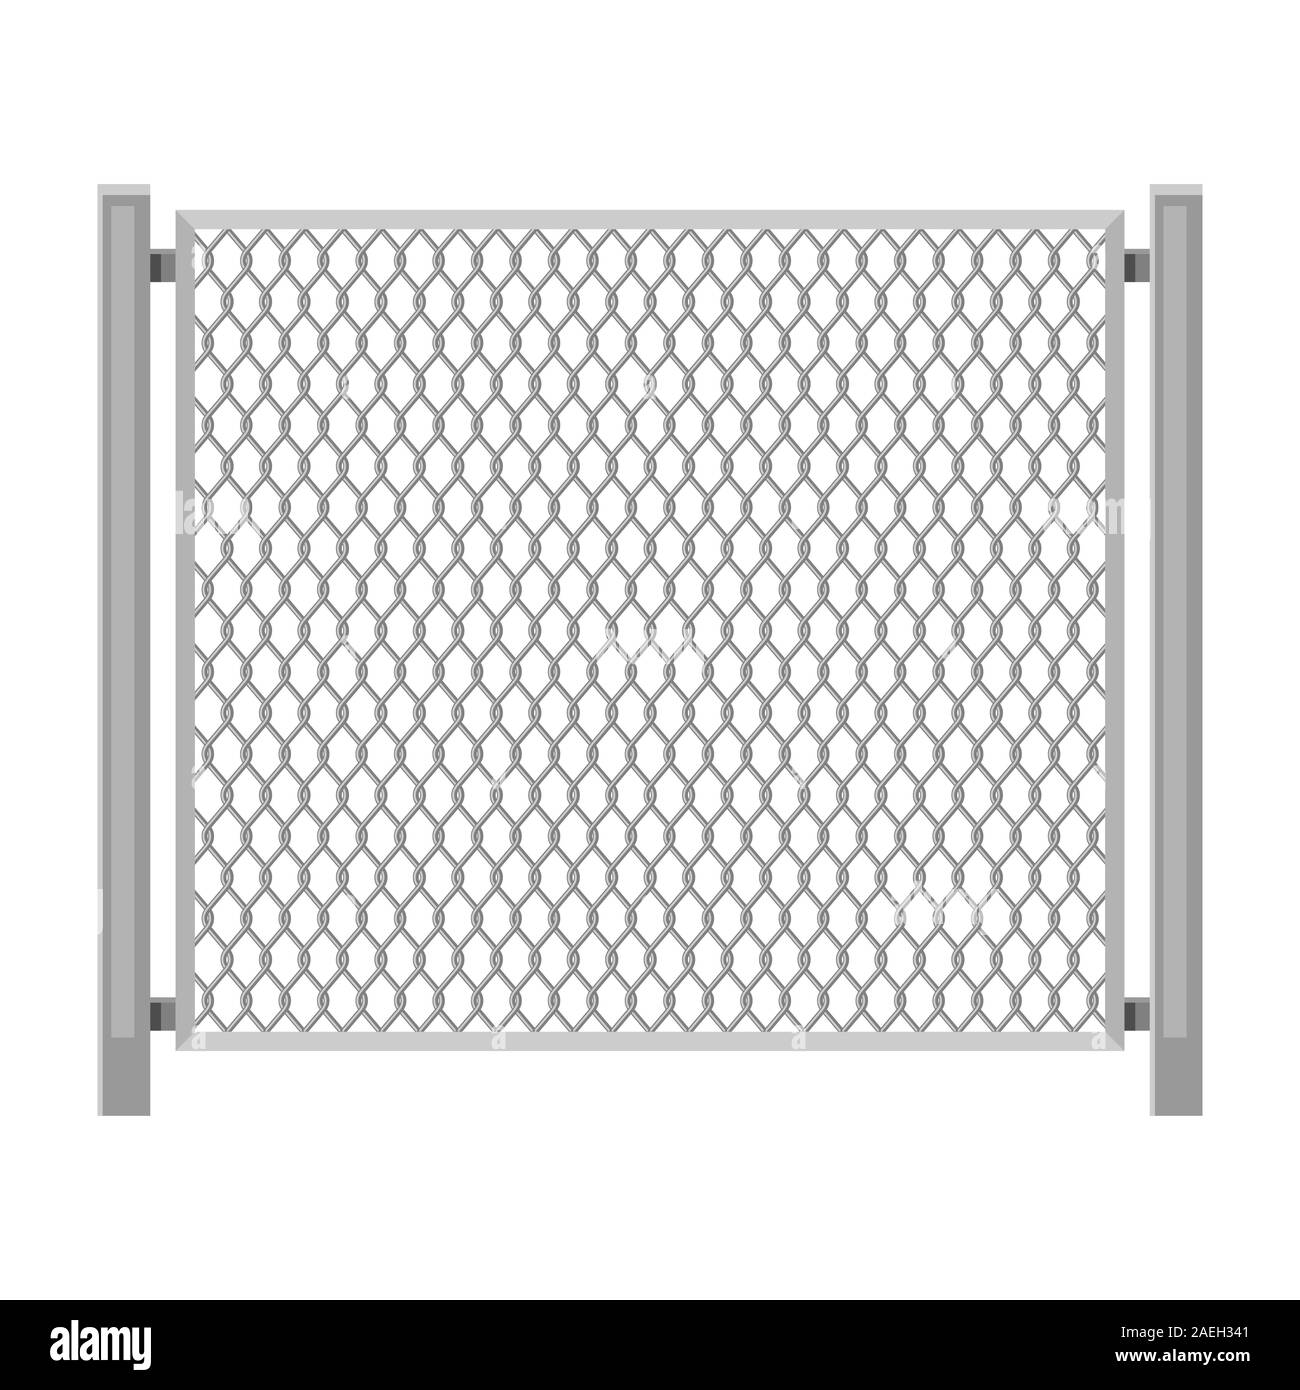 Illustration of wired chain link fence. Stock Vector